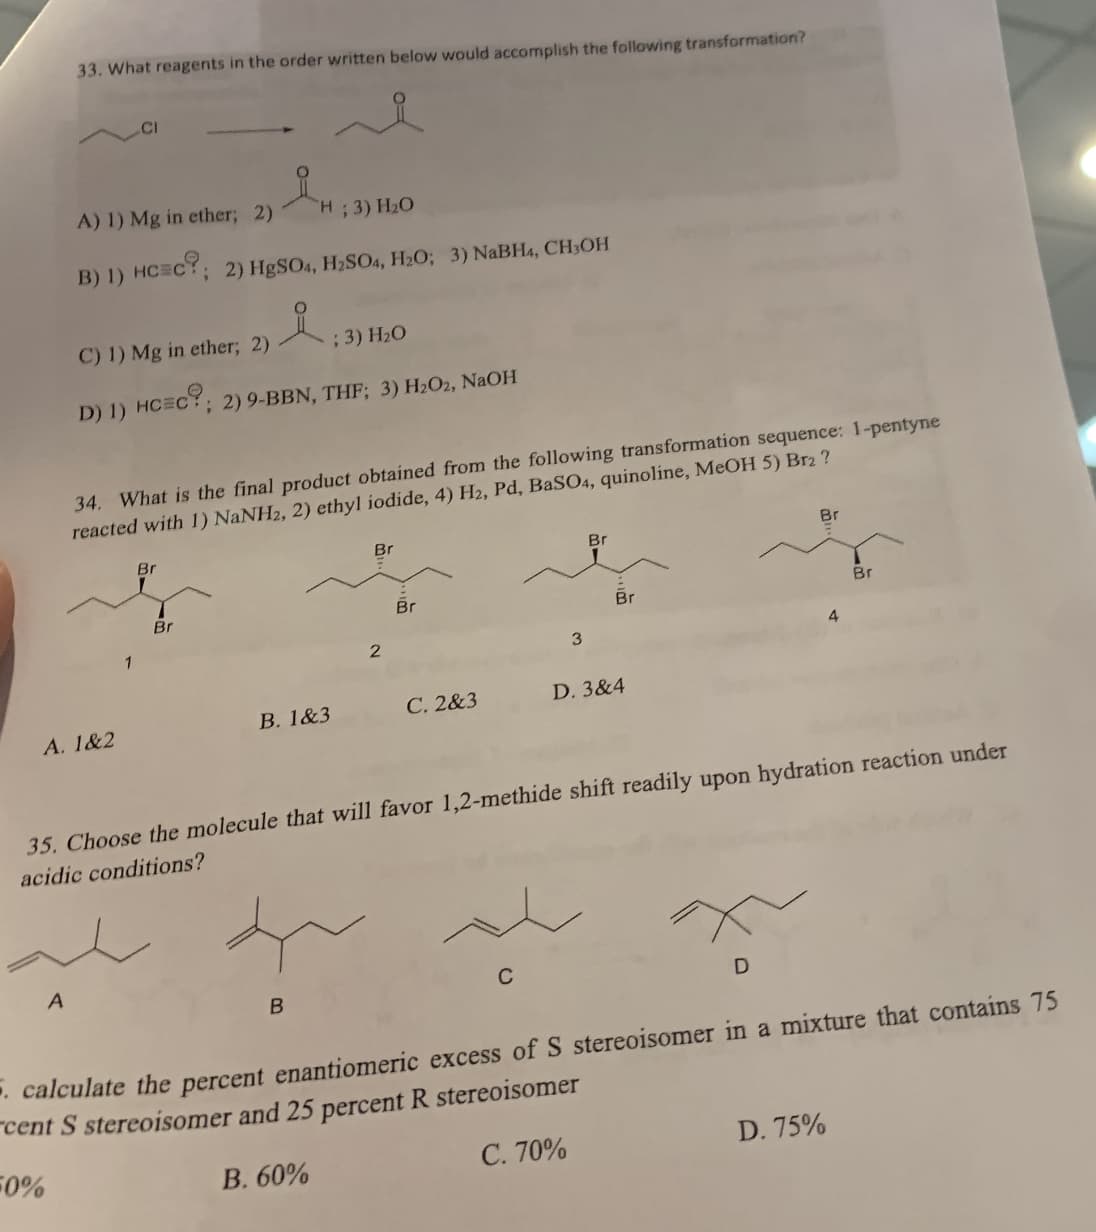 33. What reagents in the order written below would accomplish the following transformation?
A) 1) Mg in ether; 2)
"H; 3) H₂O
B) 1) HCC?; 2) HgSO4, H₂SO4, H₂O; 3) NaBH4, CH₂OH
A
C) 1) Mg in ether; 2)
; 3) H₂O
D) 1) HCEC?; 2) 9-BBN, THF; 3) H₂O2, NaOH
34. What is the final product obtained from the following transformation sequence: 1-pentyne
reacted with 1) NaNH2, 2) ethyl iodide, 4) H2, Pd, BaSO4, quinoline, MeOH 5) Br2 ?
A. 1&2
1
Br
Br
B. 1&3
Br
B
2
Br
C. 2&3
3
C
Br
Br
D. 3&4
35. Choose the molecule that will favor 1,2-methide shift readily upon hydration reaction under
acidic conditions?
Br
D
4
Br
D. 75%
calculate the percent enantiomeric excess of S stereoisomer in a mixture that contains 75
cent S stereoisomer and 25 percent R stereoisomer
-0%
B. 60%
C. 70%